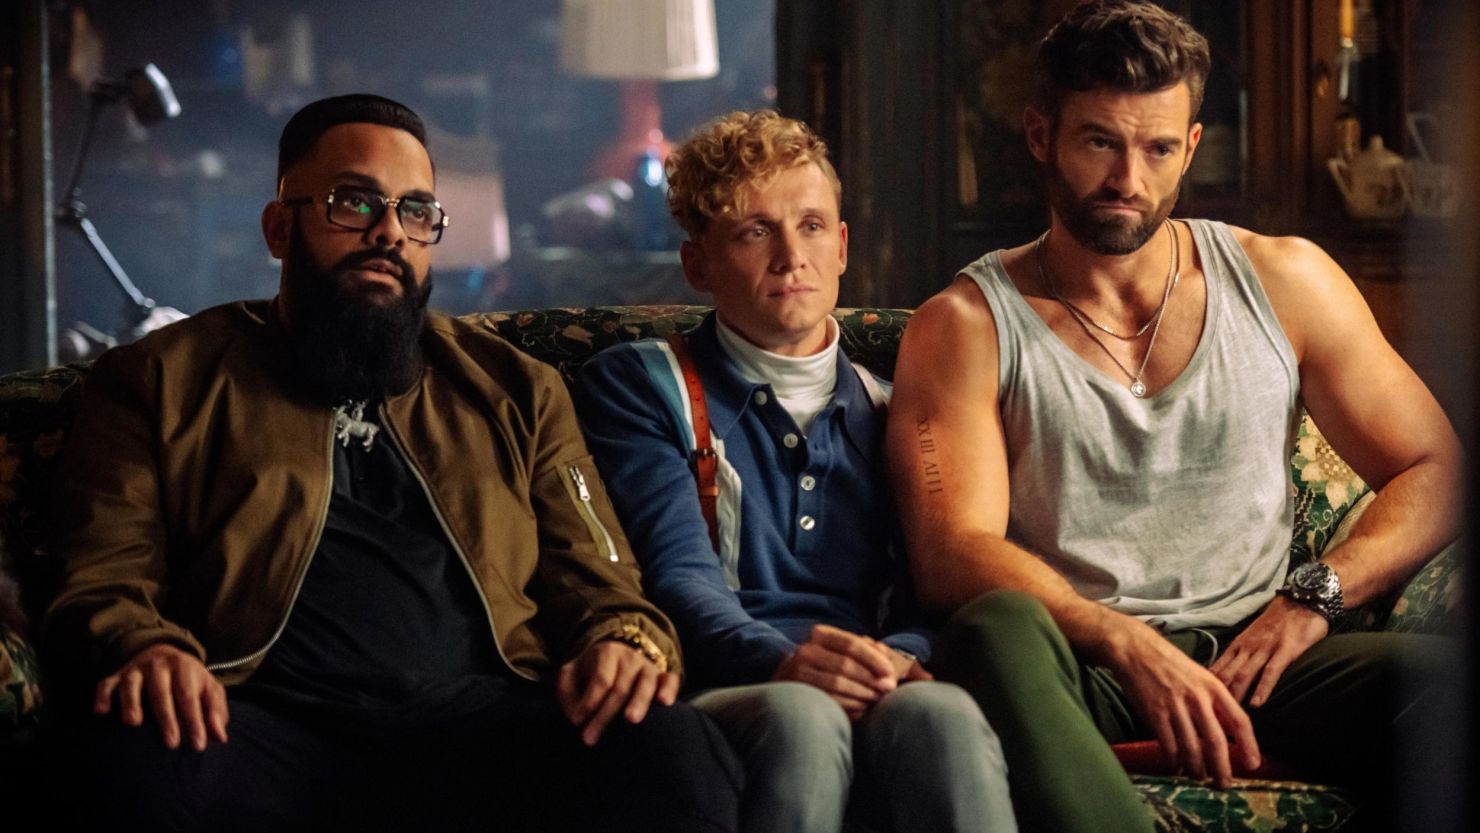 (From left) Guz Khan as Rolph, Matthias Schweighöfer as Ludwig Dieter, and Stuart Martin as Brad Cage star in "Army of Thieves."  